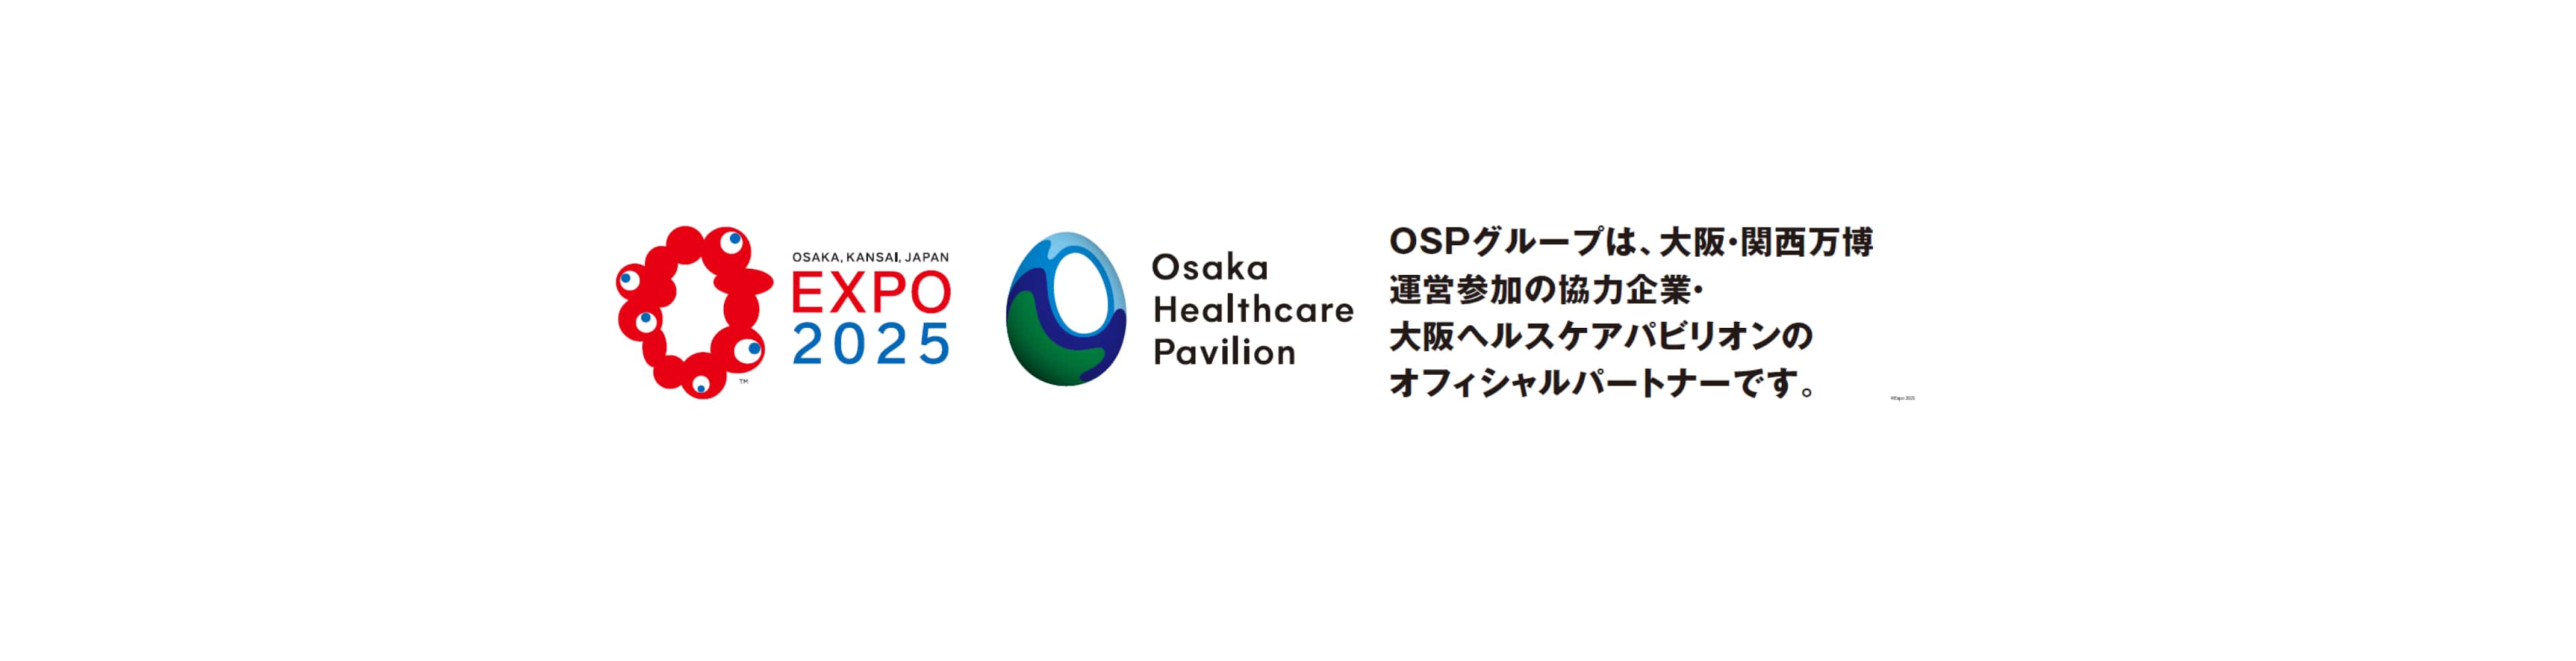 The OSP Group is cooperating in participating in the operation of the Osaka-Kansai Expo.